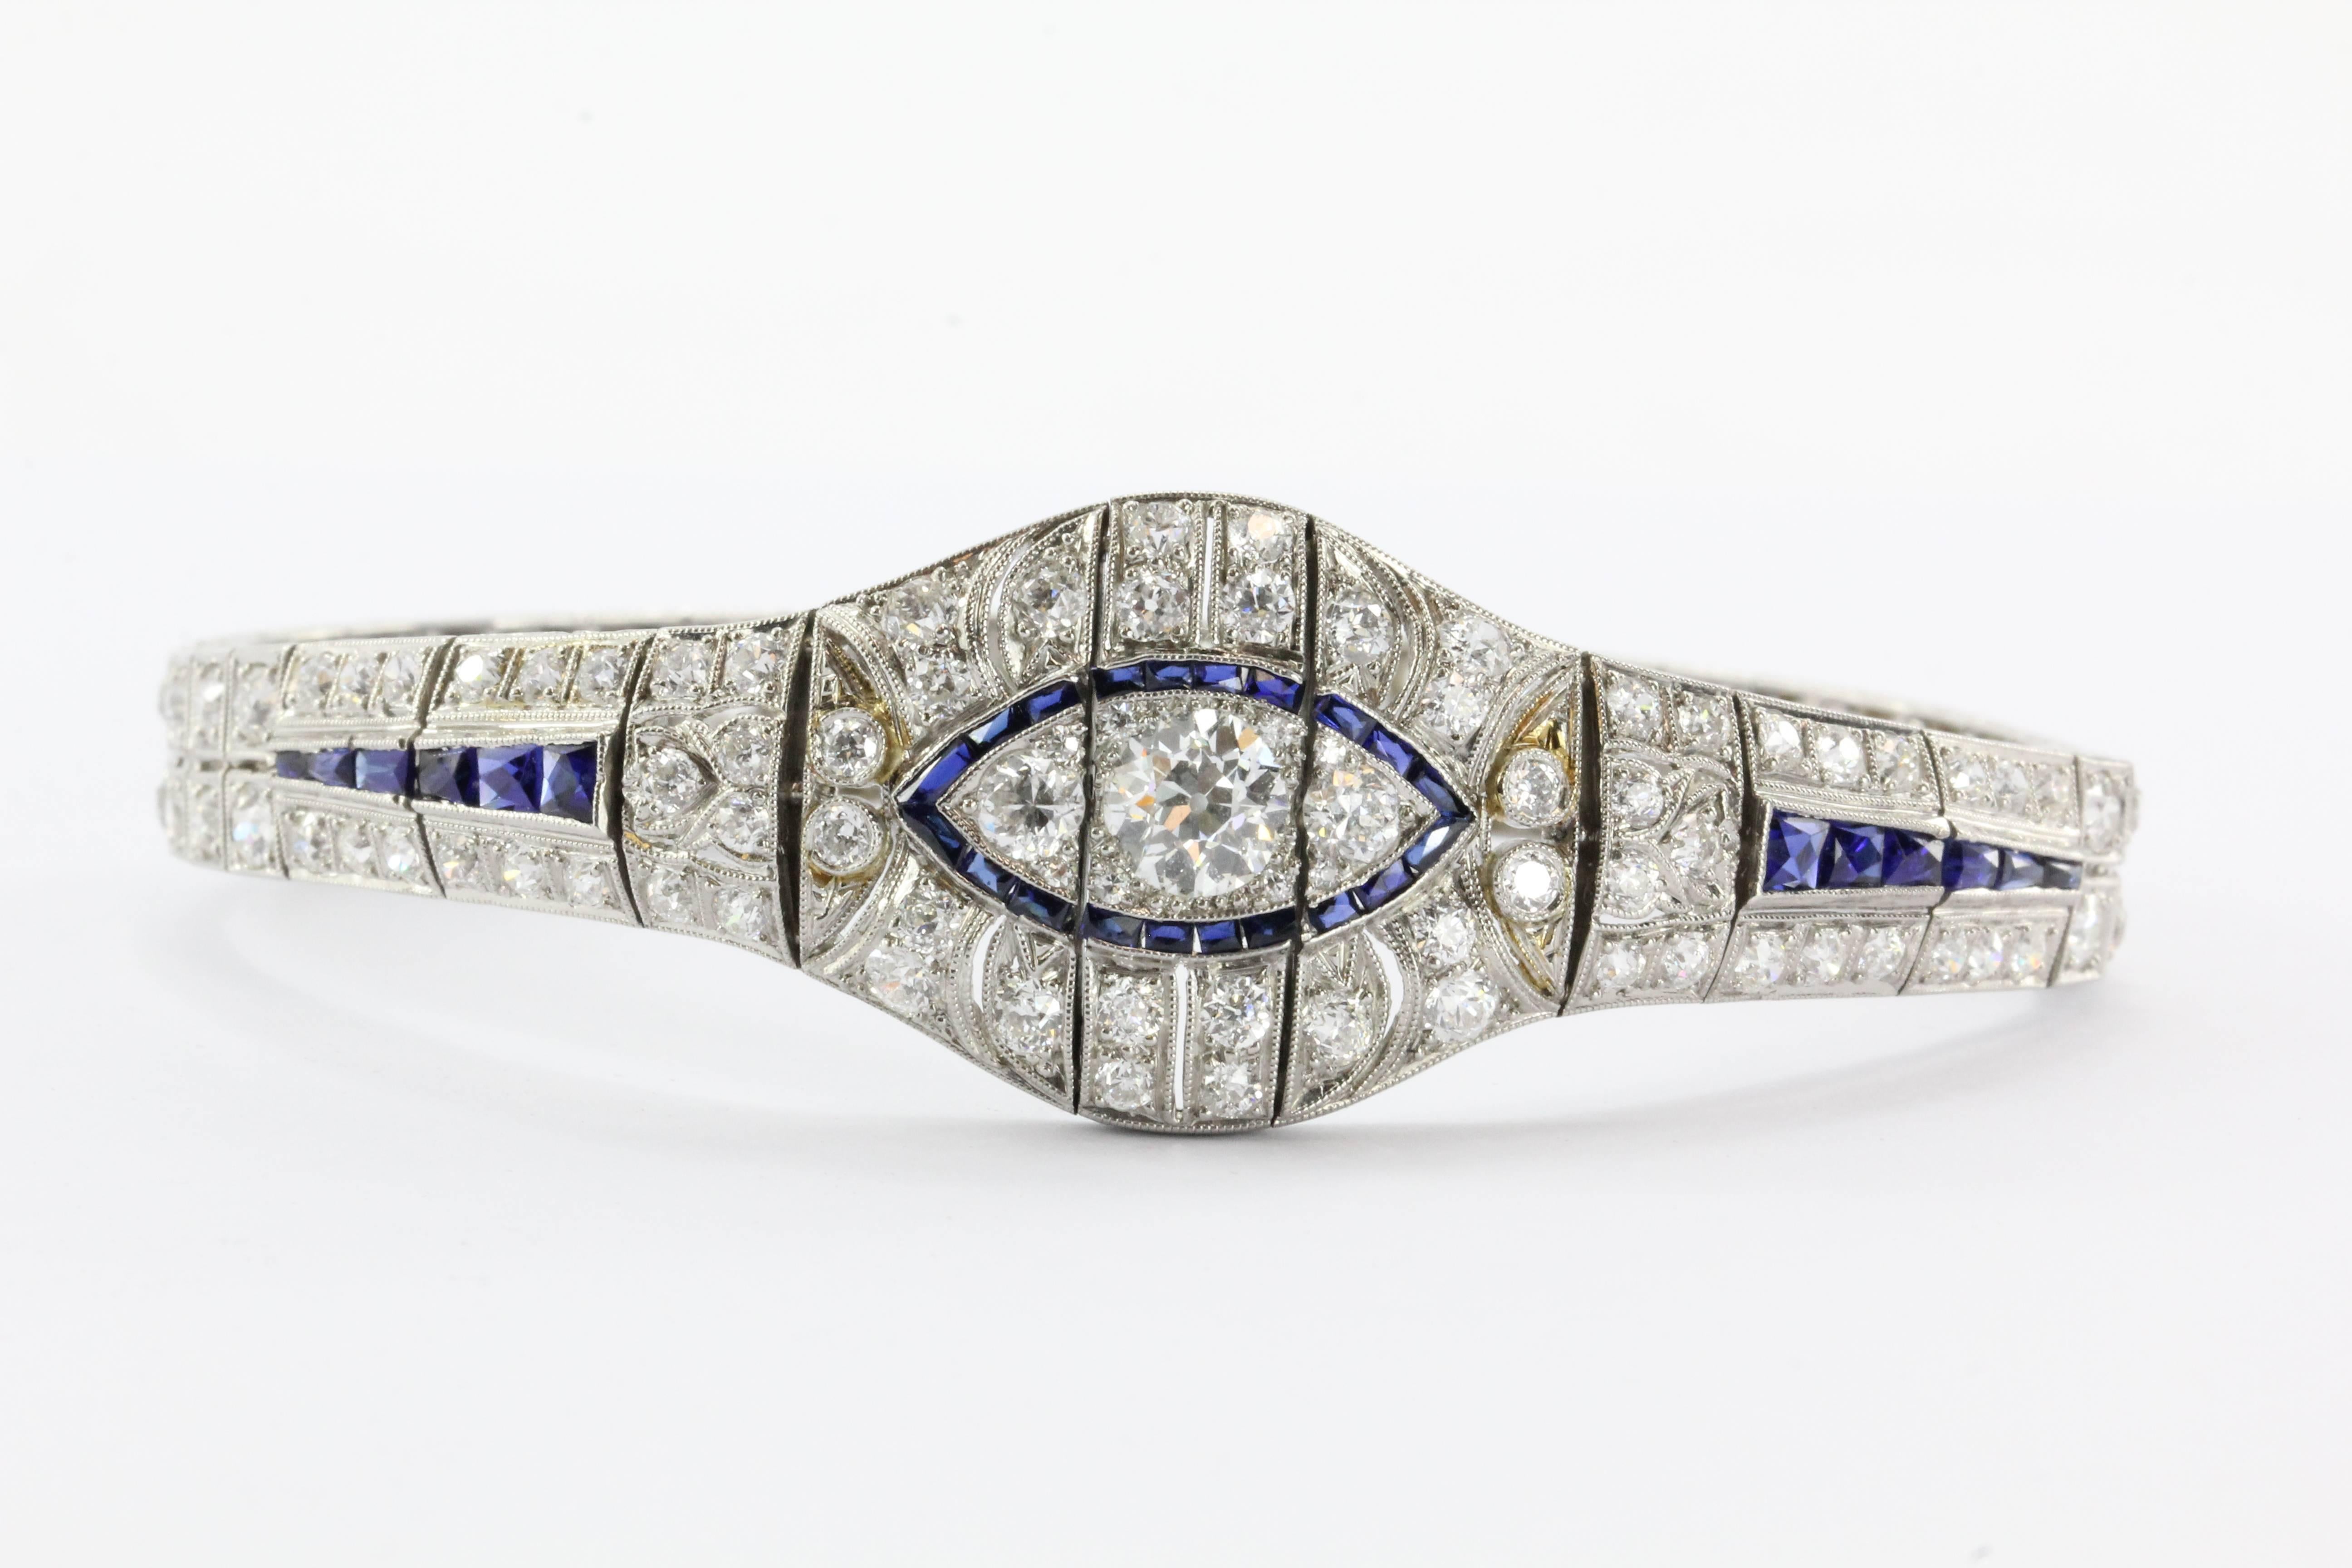 A genuine very high quality Art Deco Platinum Bracelet with 10 Carats of Diamonds & Sapphires. The bracelet is in excellent original estate condition and ready to wear.  The bracelet appears in such great condition that it may have only been